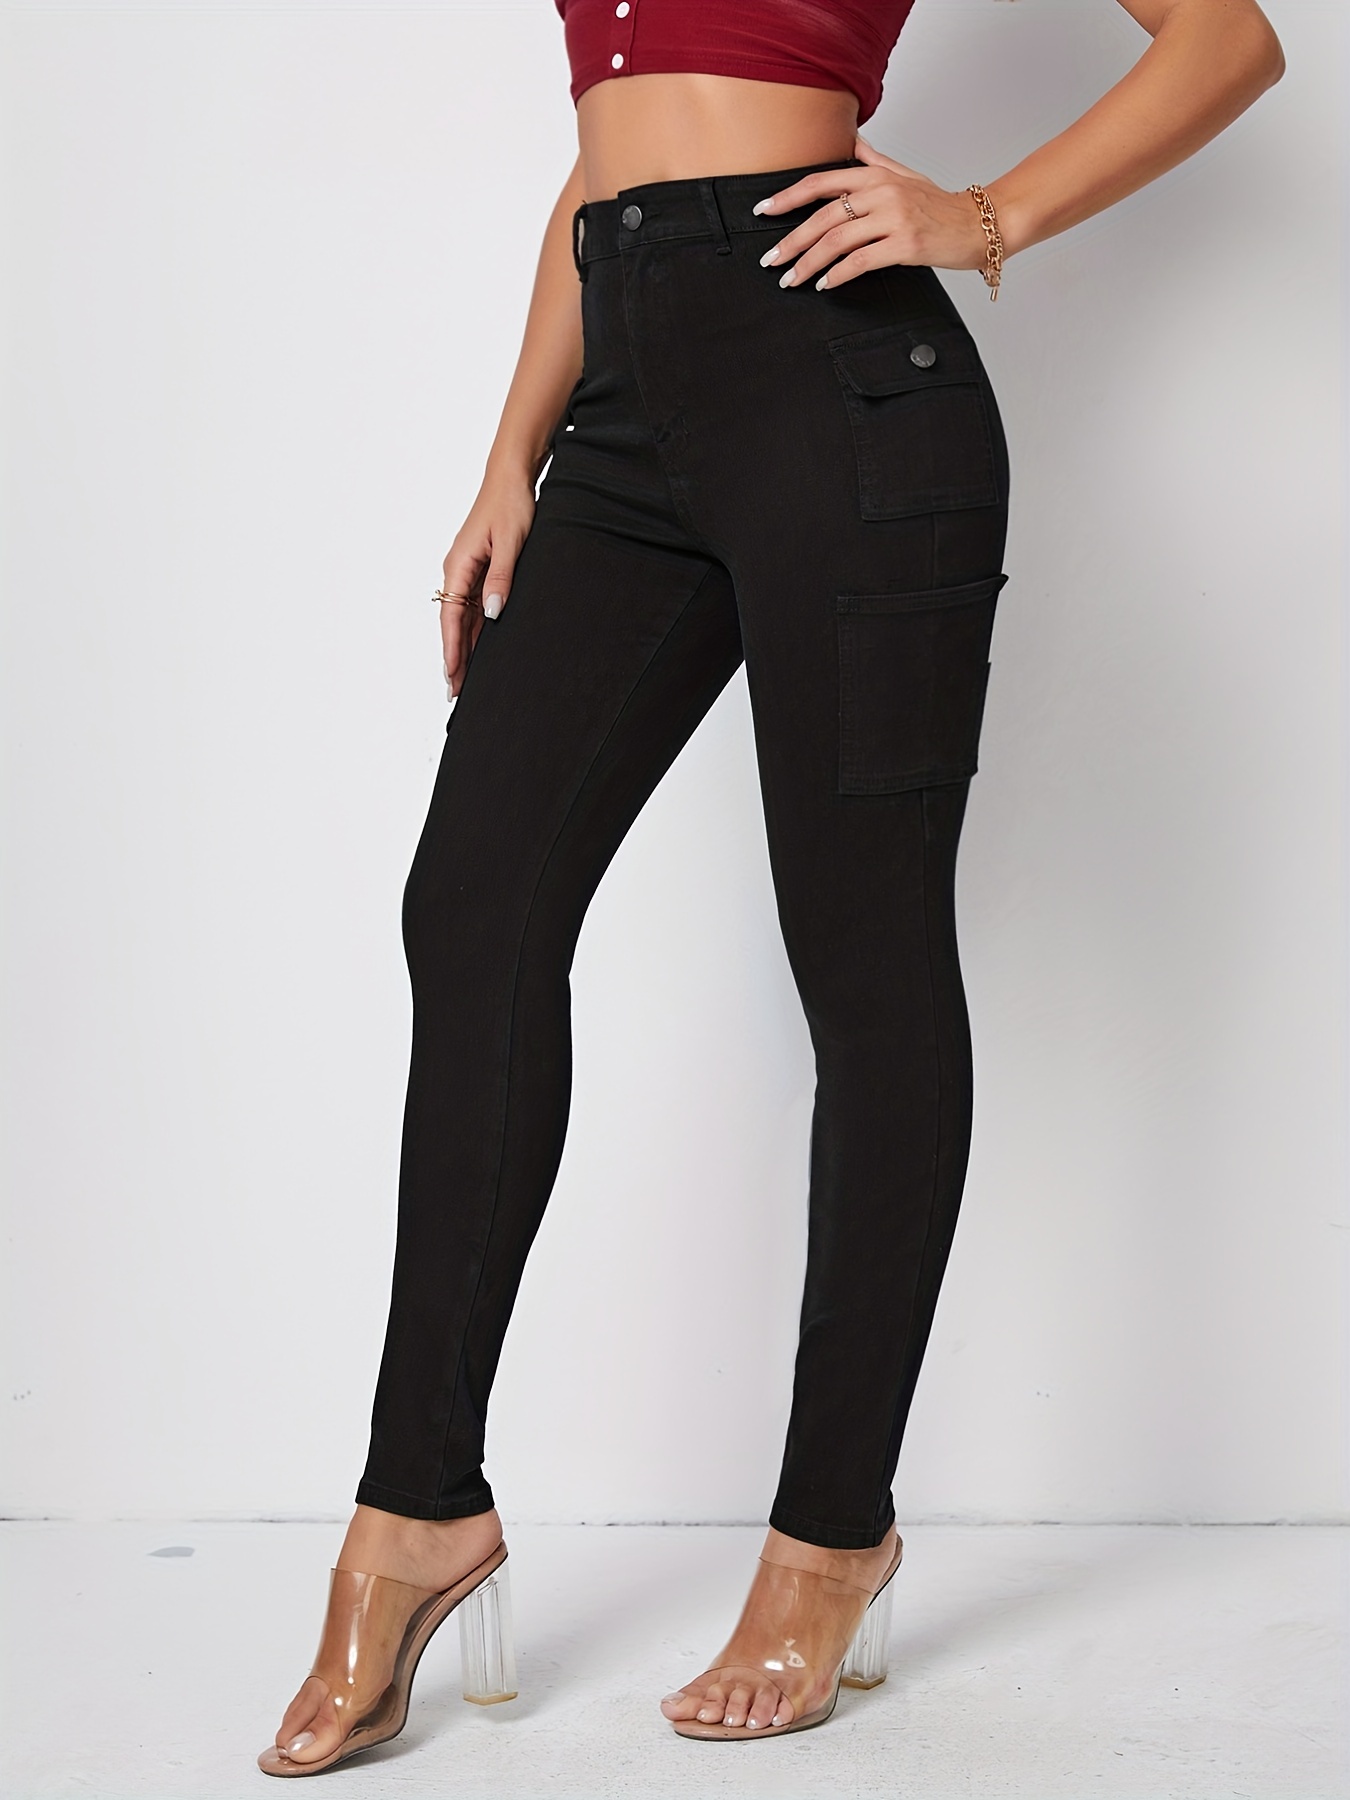 Black Flap Pockets Straight Jeans Loose Fit Non stretch High